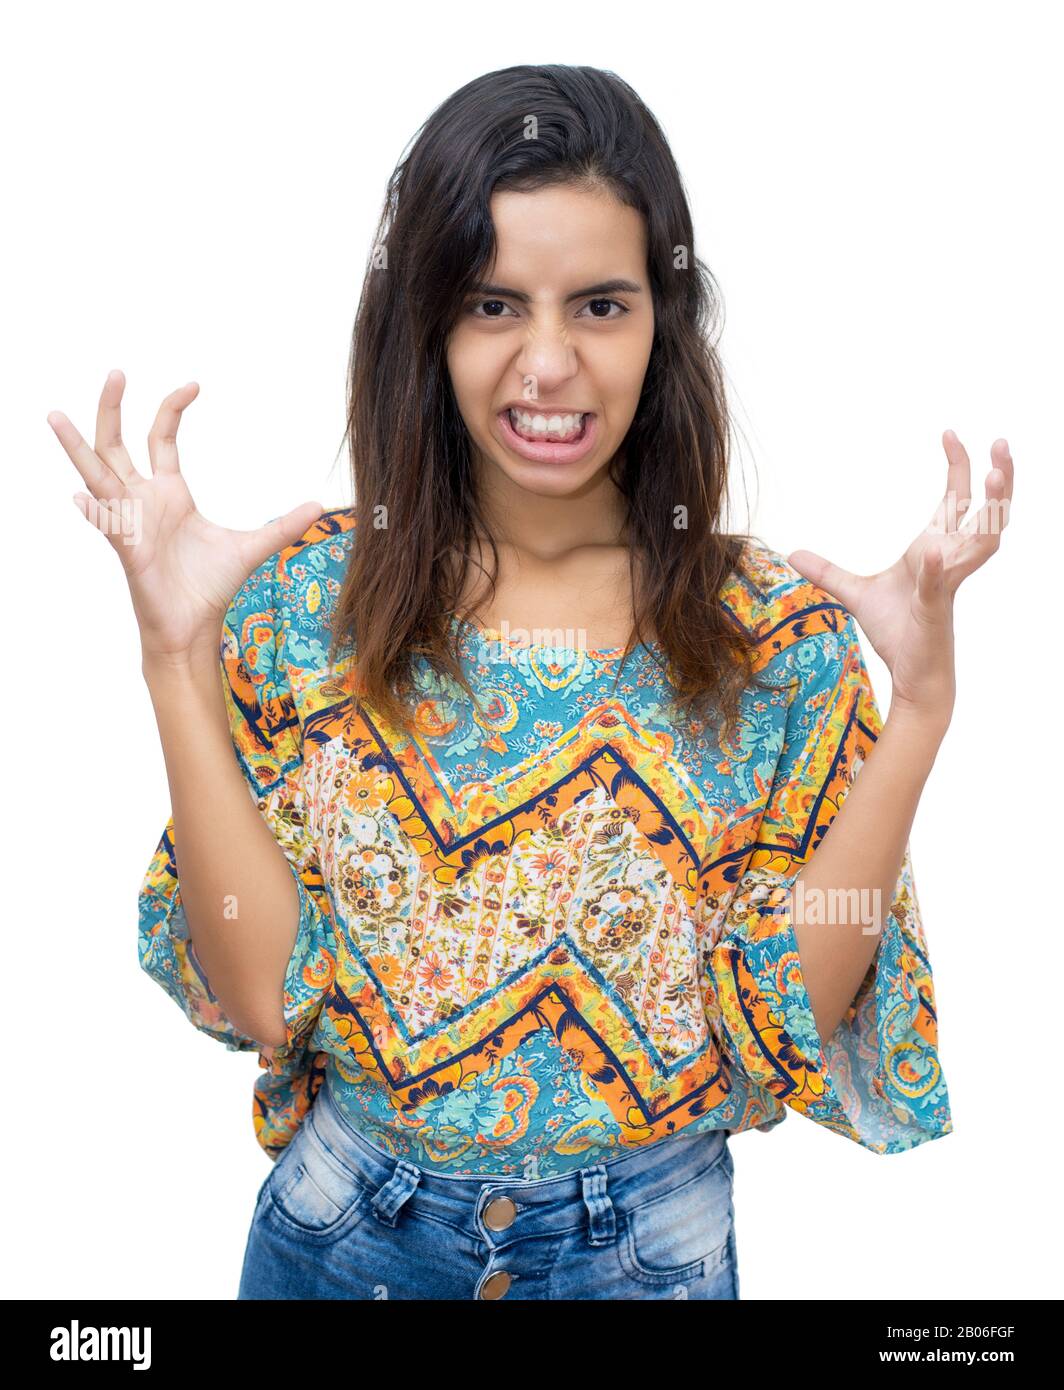 Angry mexican young adult woman with long dark hair on isolated white background for cut out Stock Photo